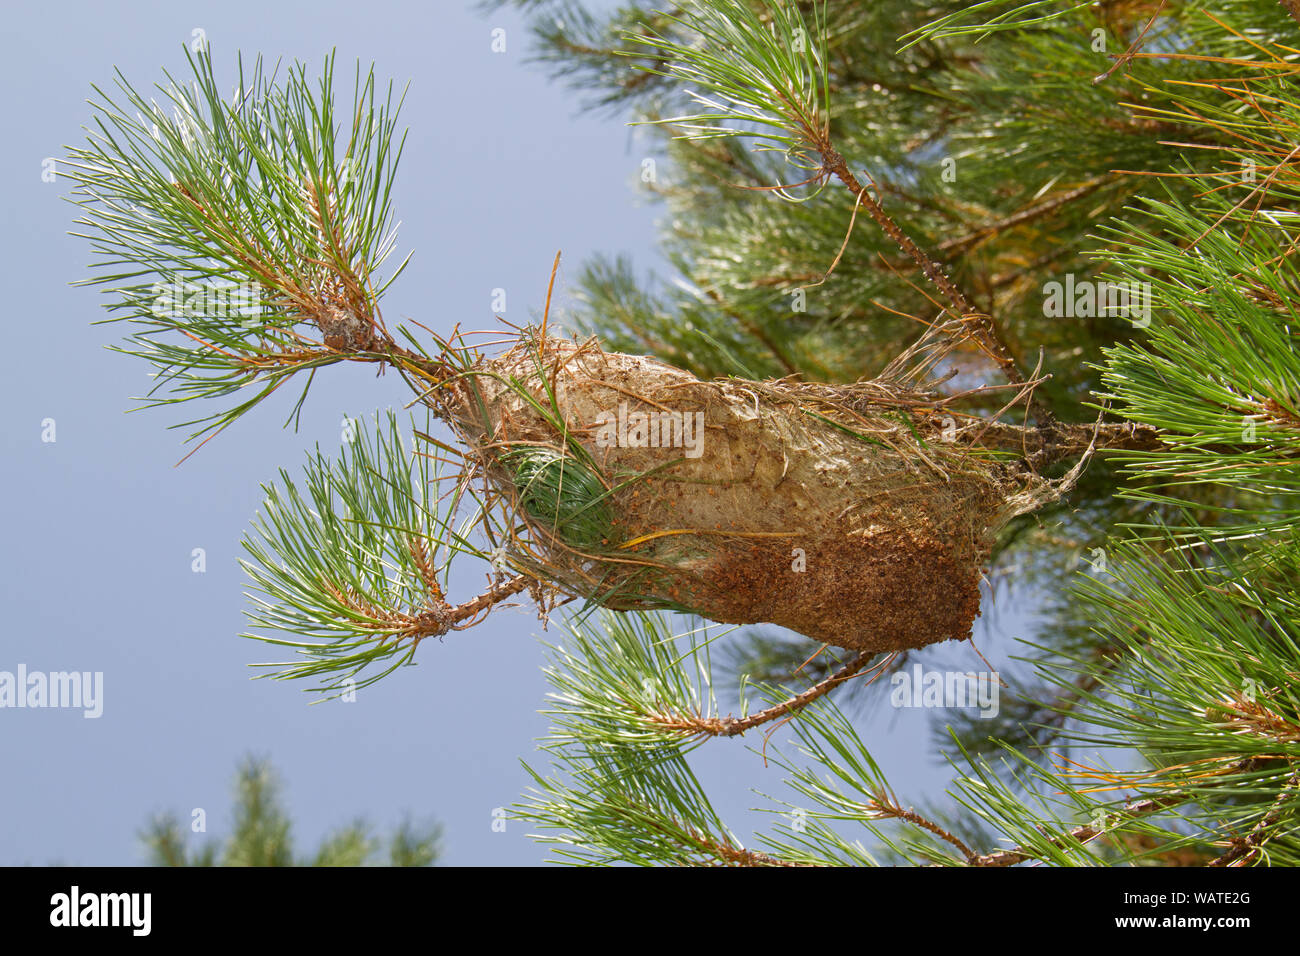 Shelter made by larvae of Pine processionary caterpillar in a pine tree Stock Photo